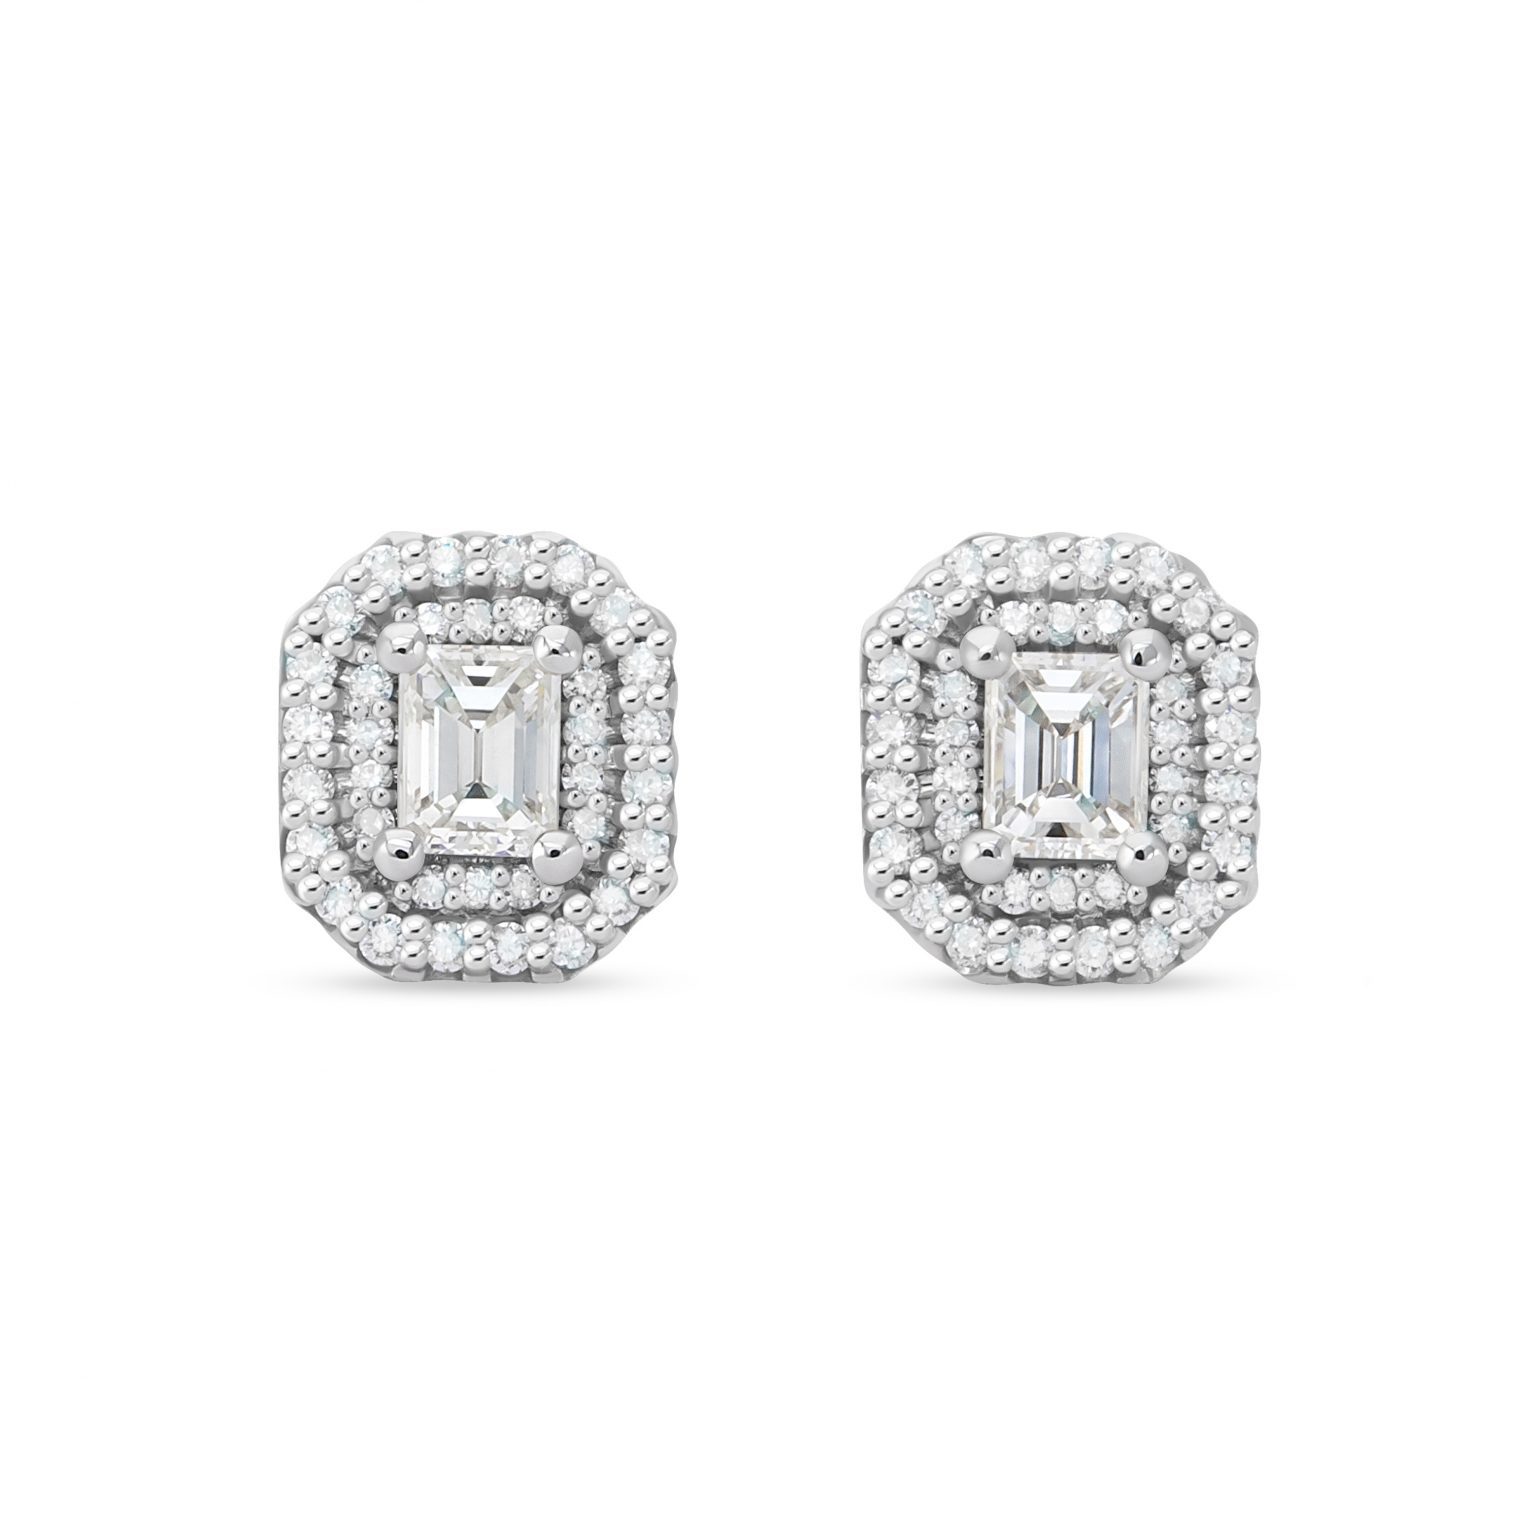 Diamond stud earrings with a total weight of 3.07 ct